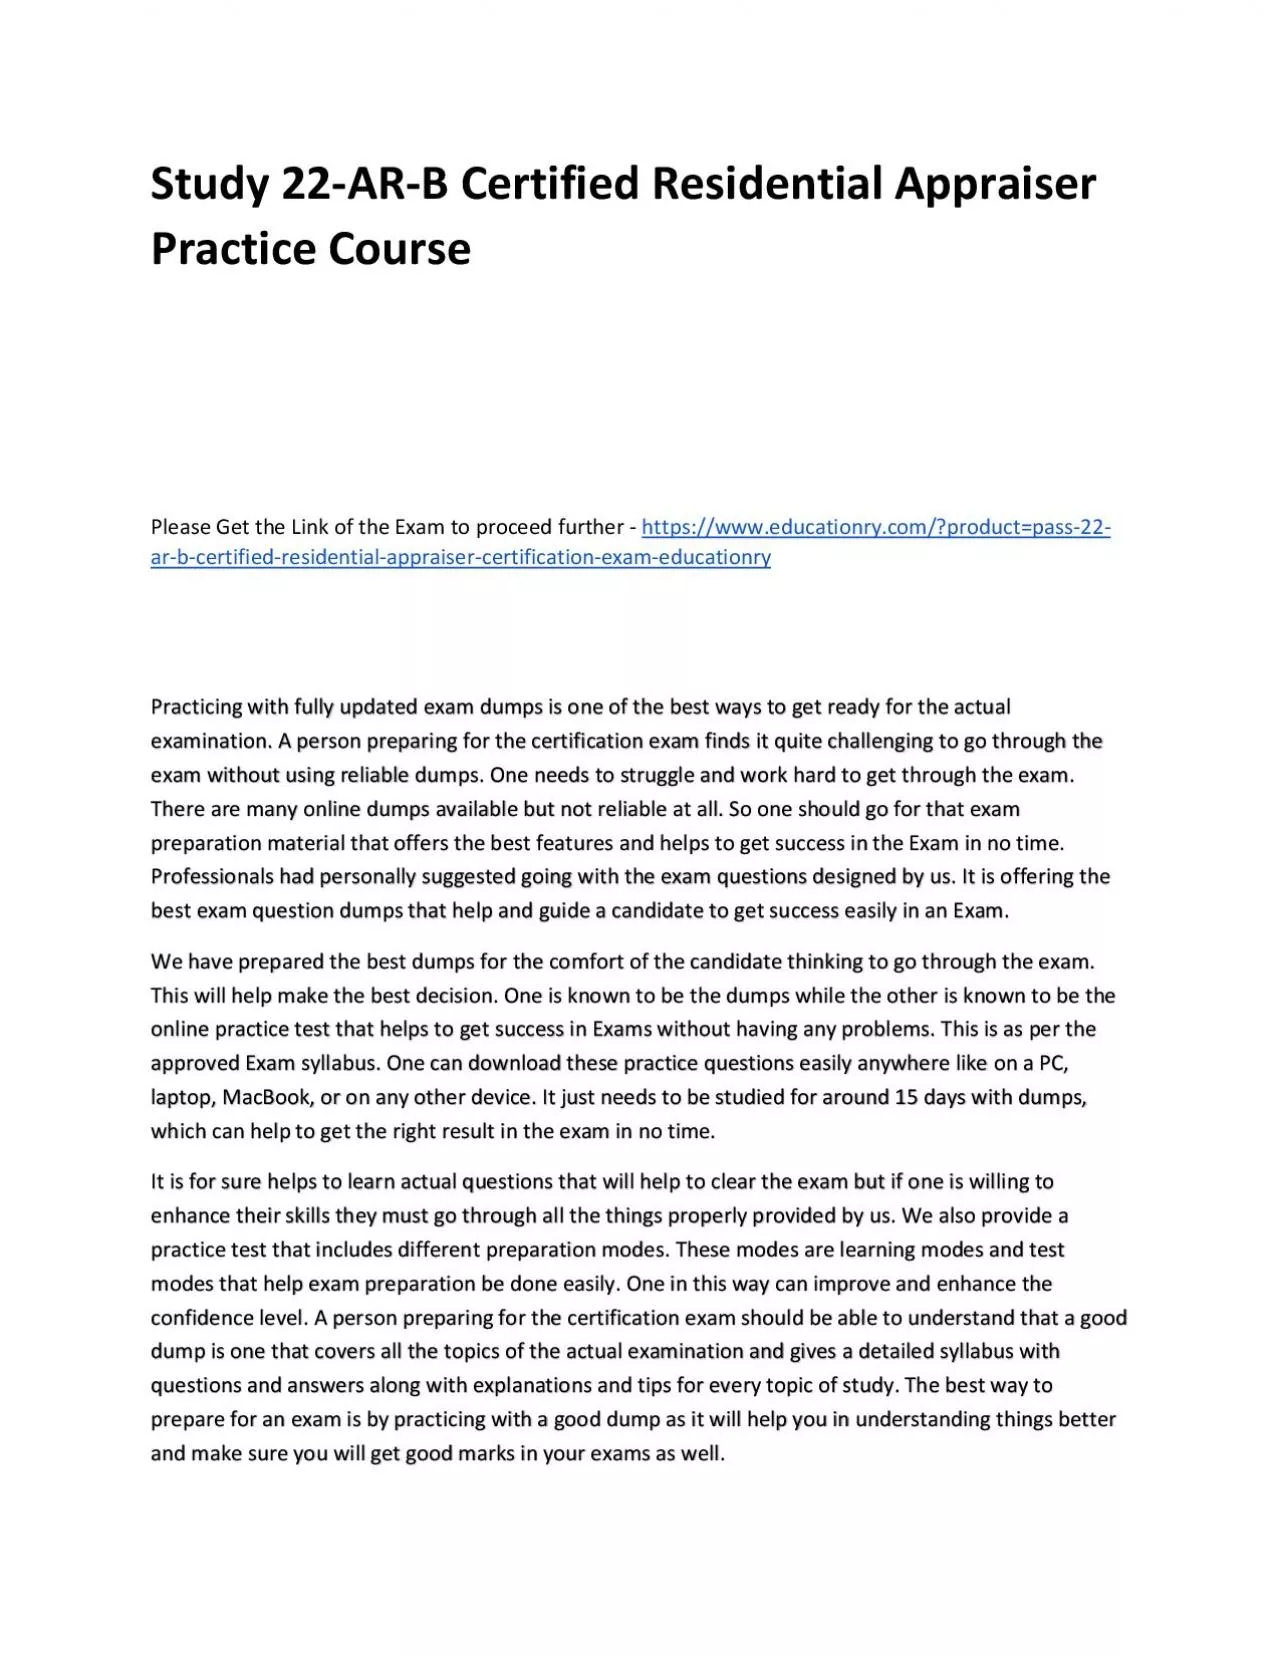 Study 22-AR-B Certified Residential Appraiser Practice Course